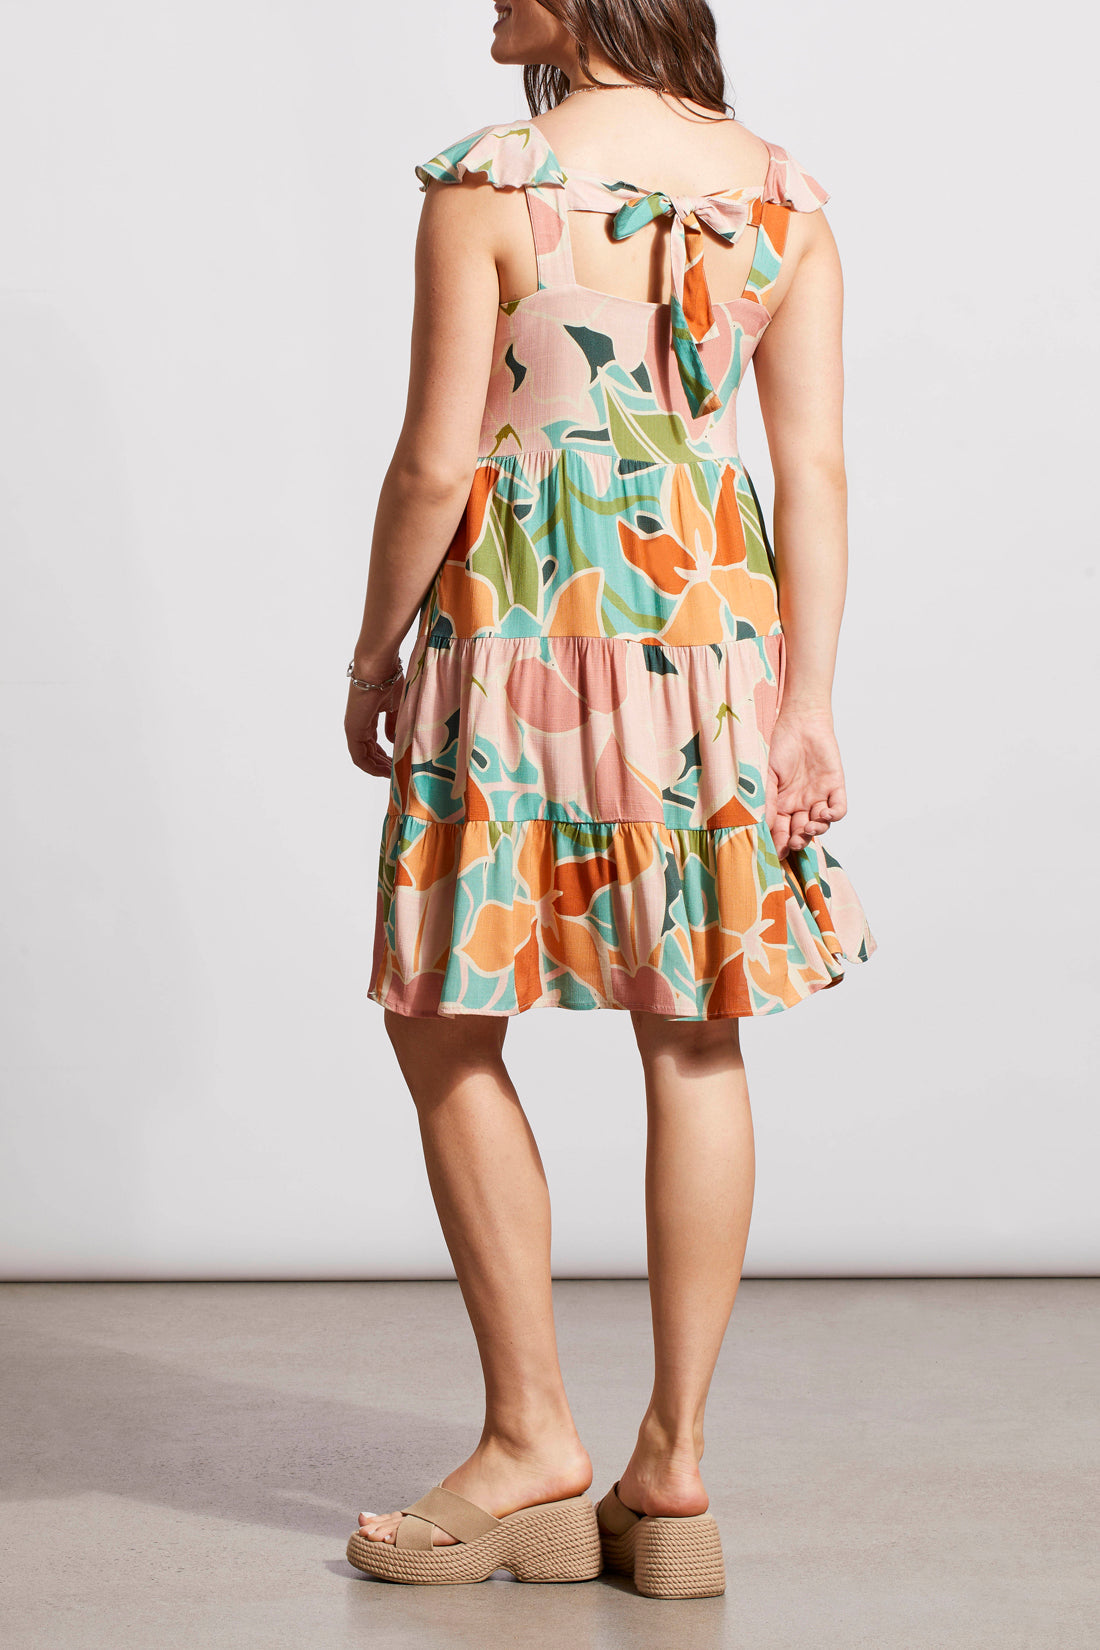 A woman in a Tribal sleeveless dress with lining, floral print and tie back, paired with beige sandals standing against a plain backdrop.